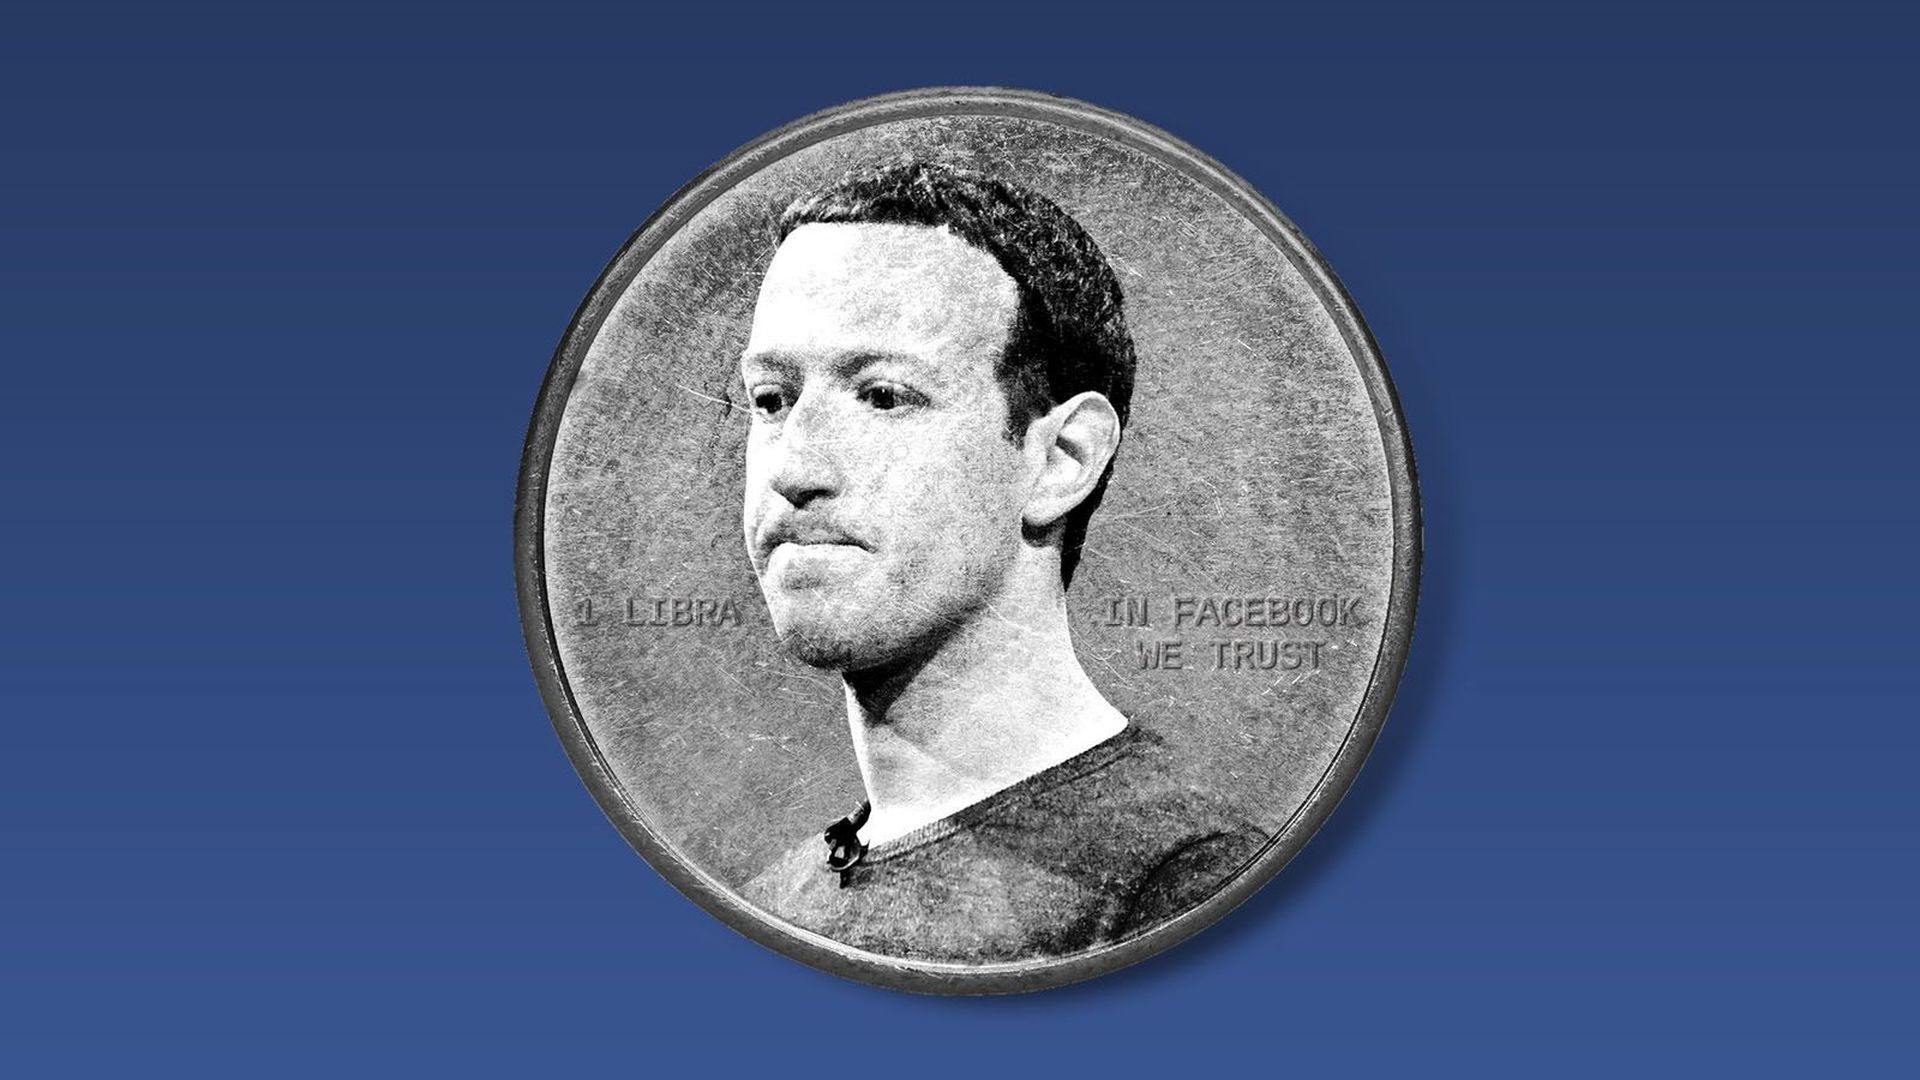 An image of a coin with Facebook CEO Mark Zuckerberg on the front